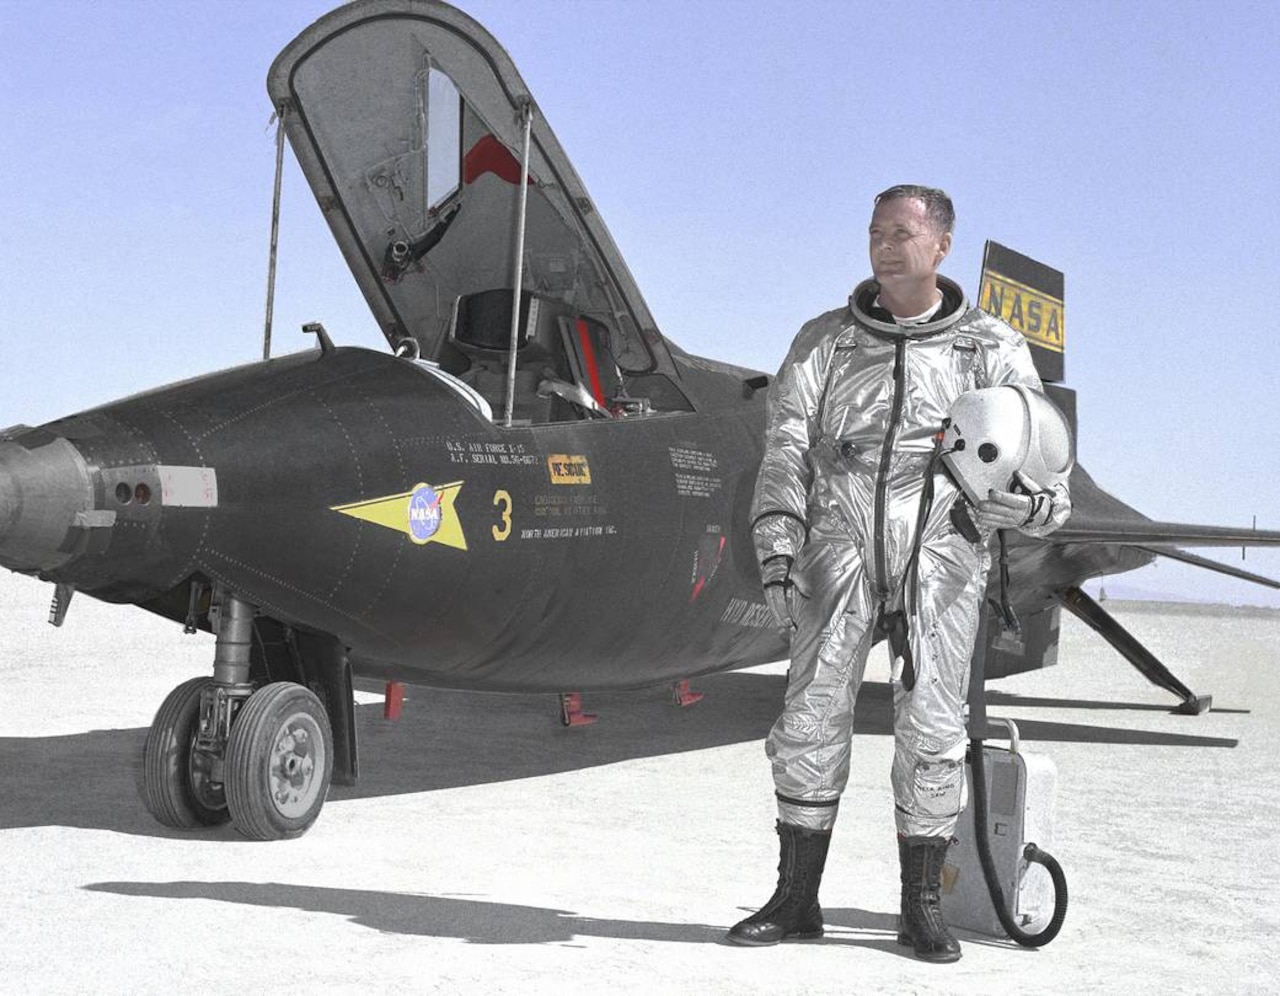 A man in a silver suit stands in front of a military-style research aircraft.